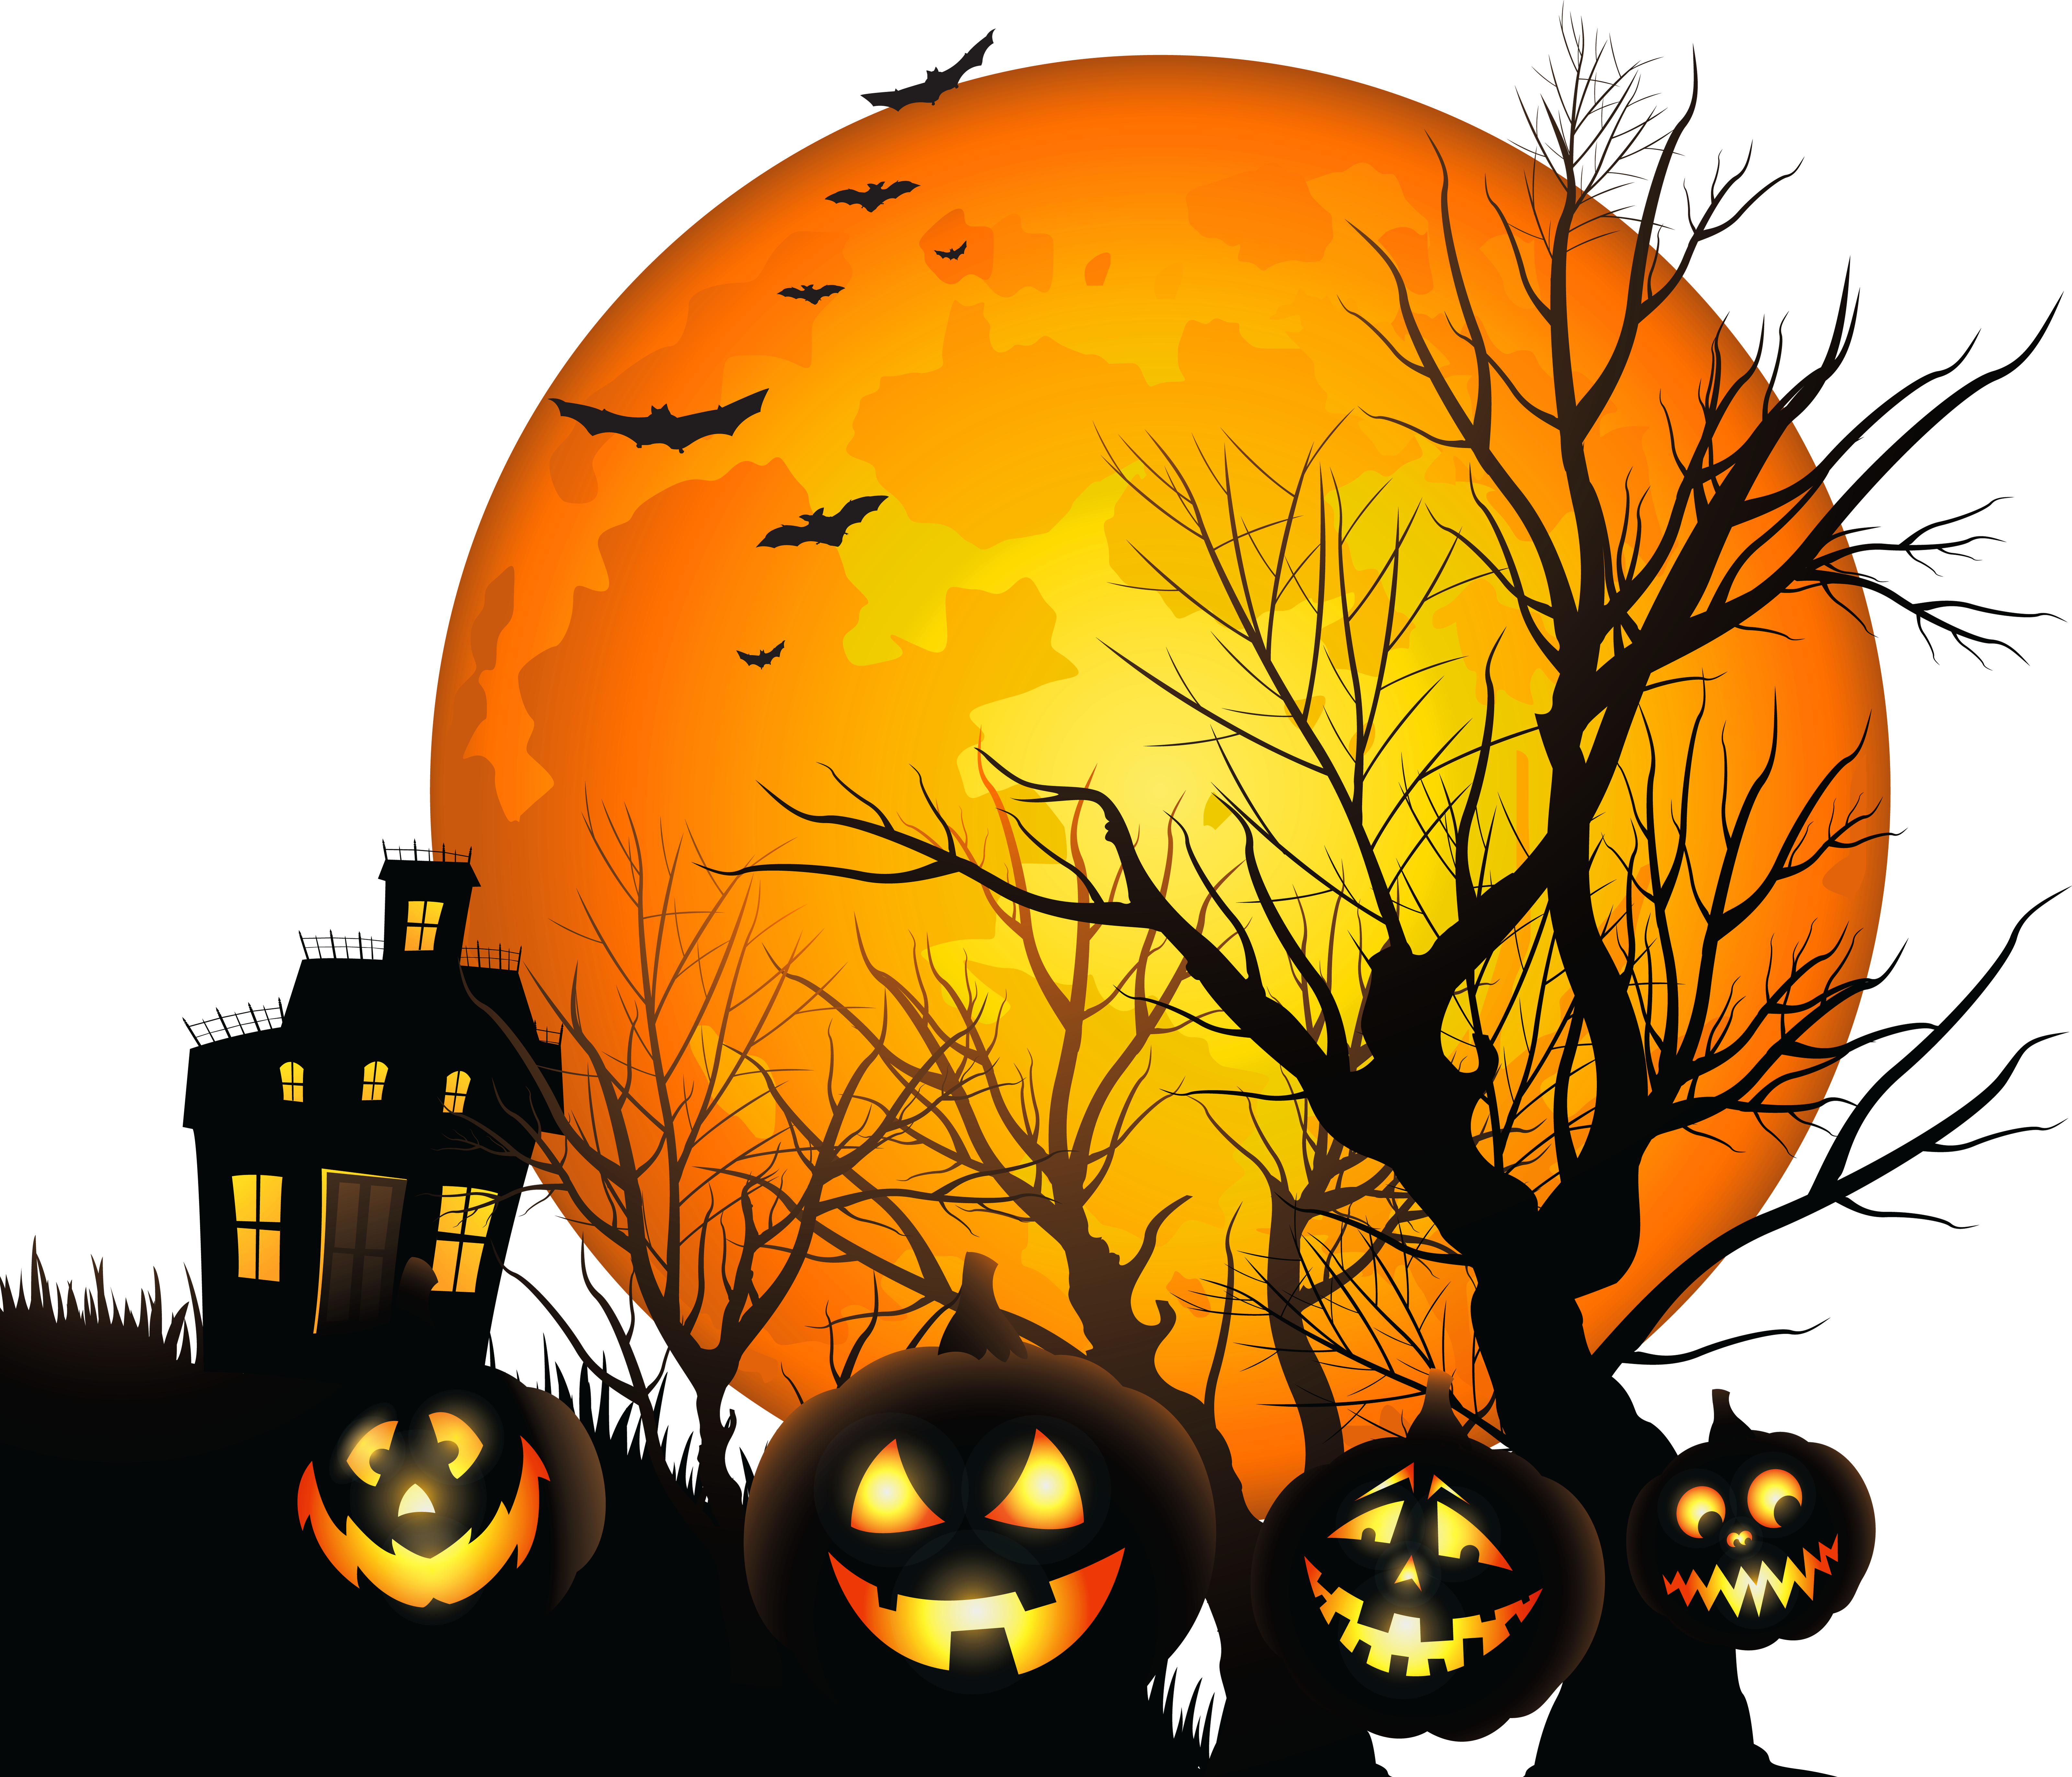 Large haunted house and. Halloween clipart night